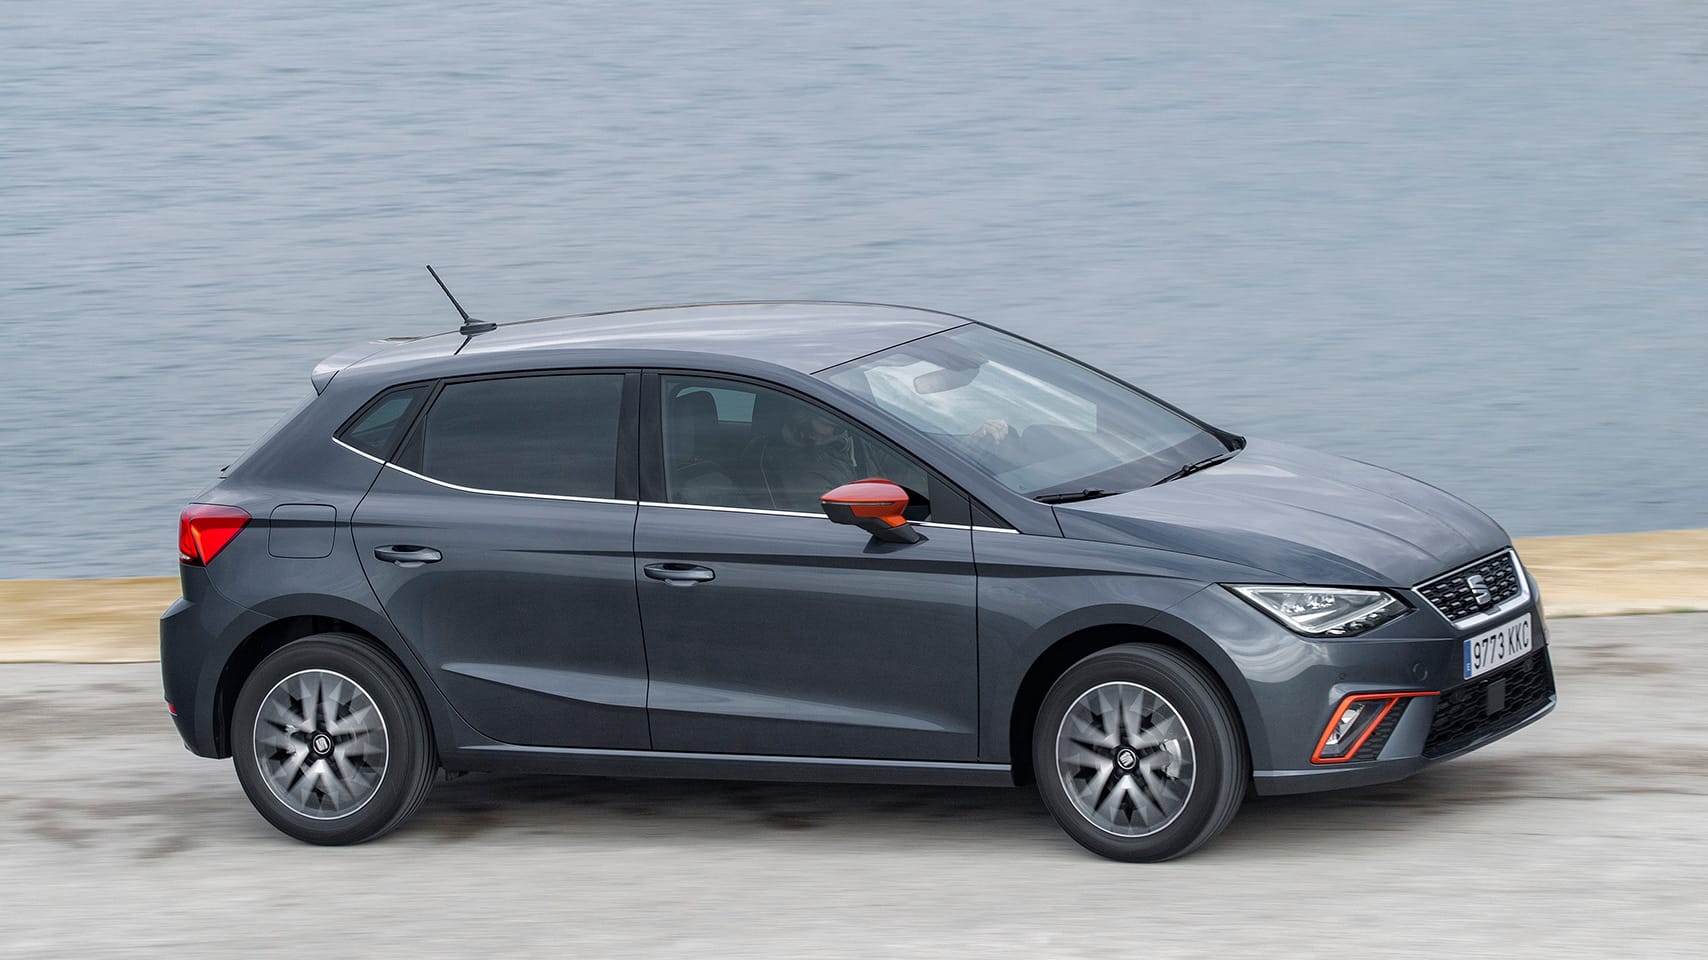 SEAT Ibiza driving outside forest landscape